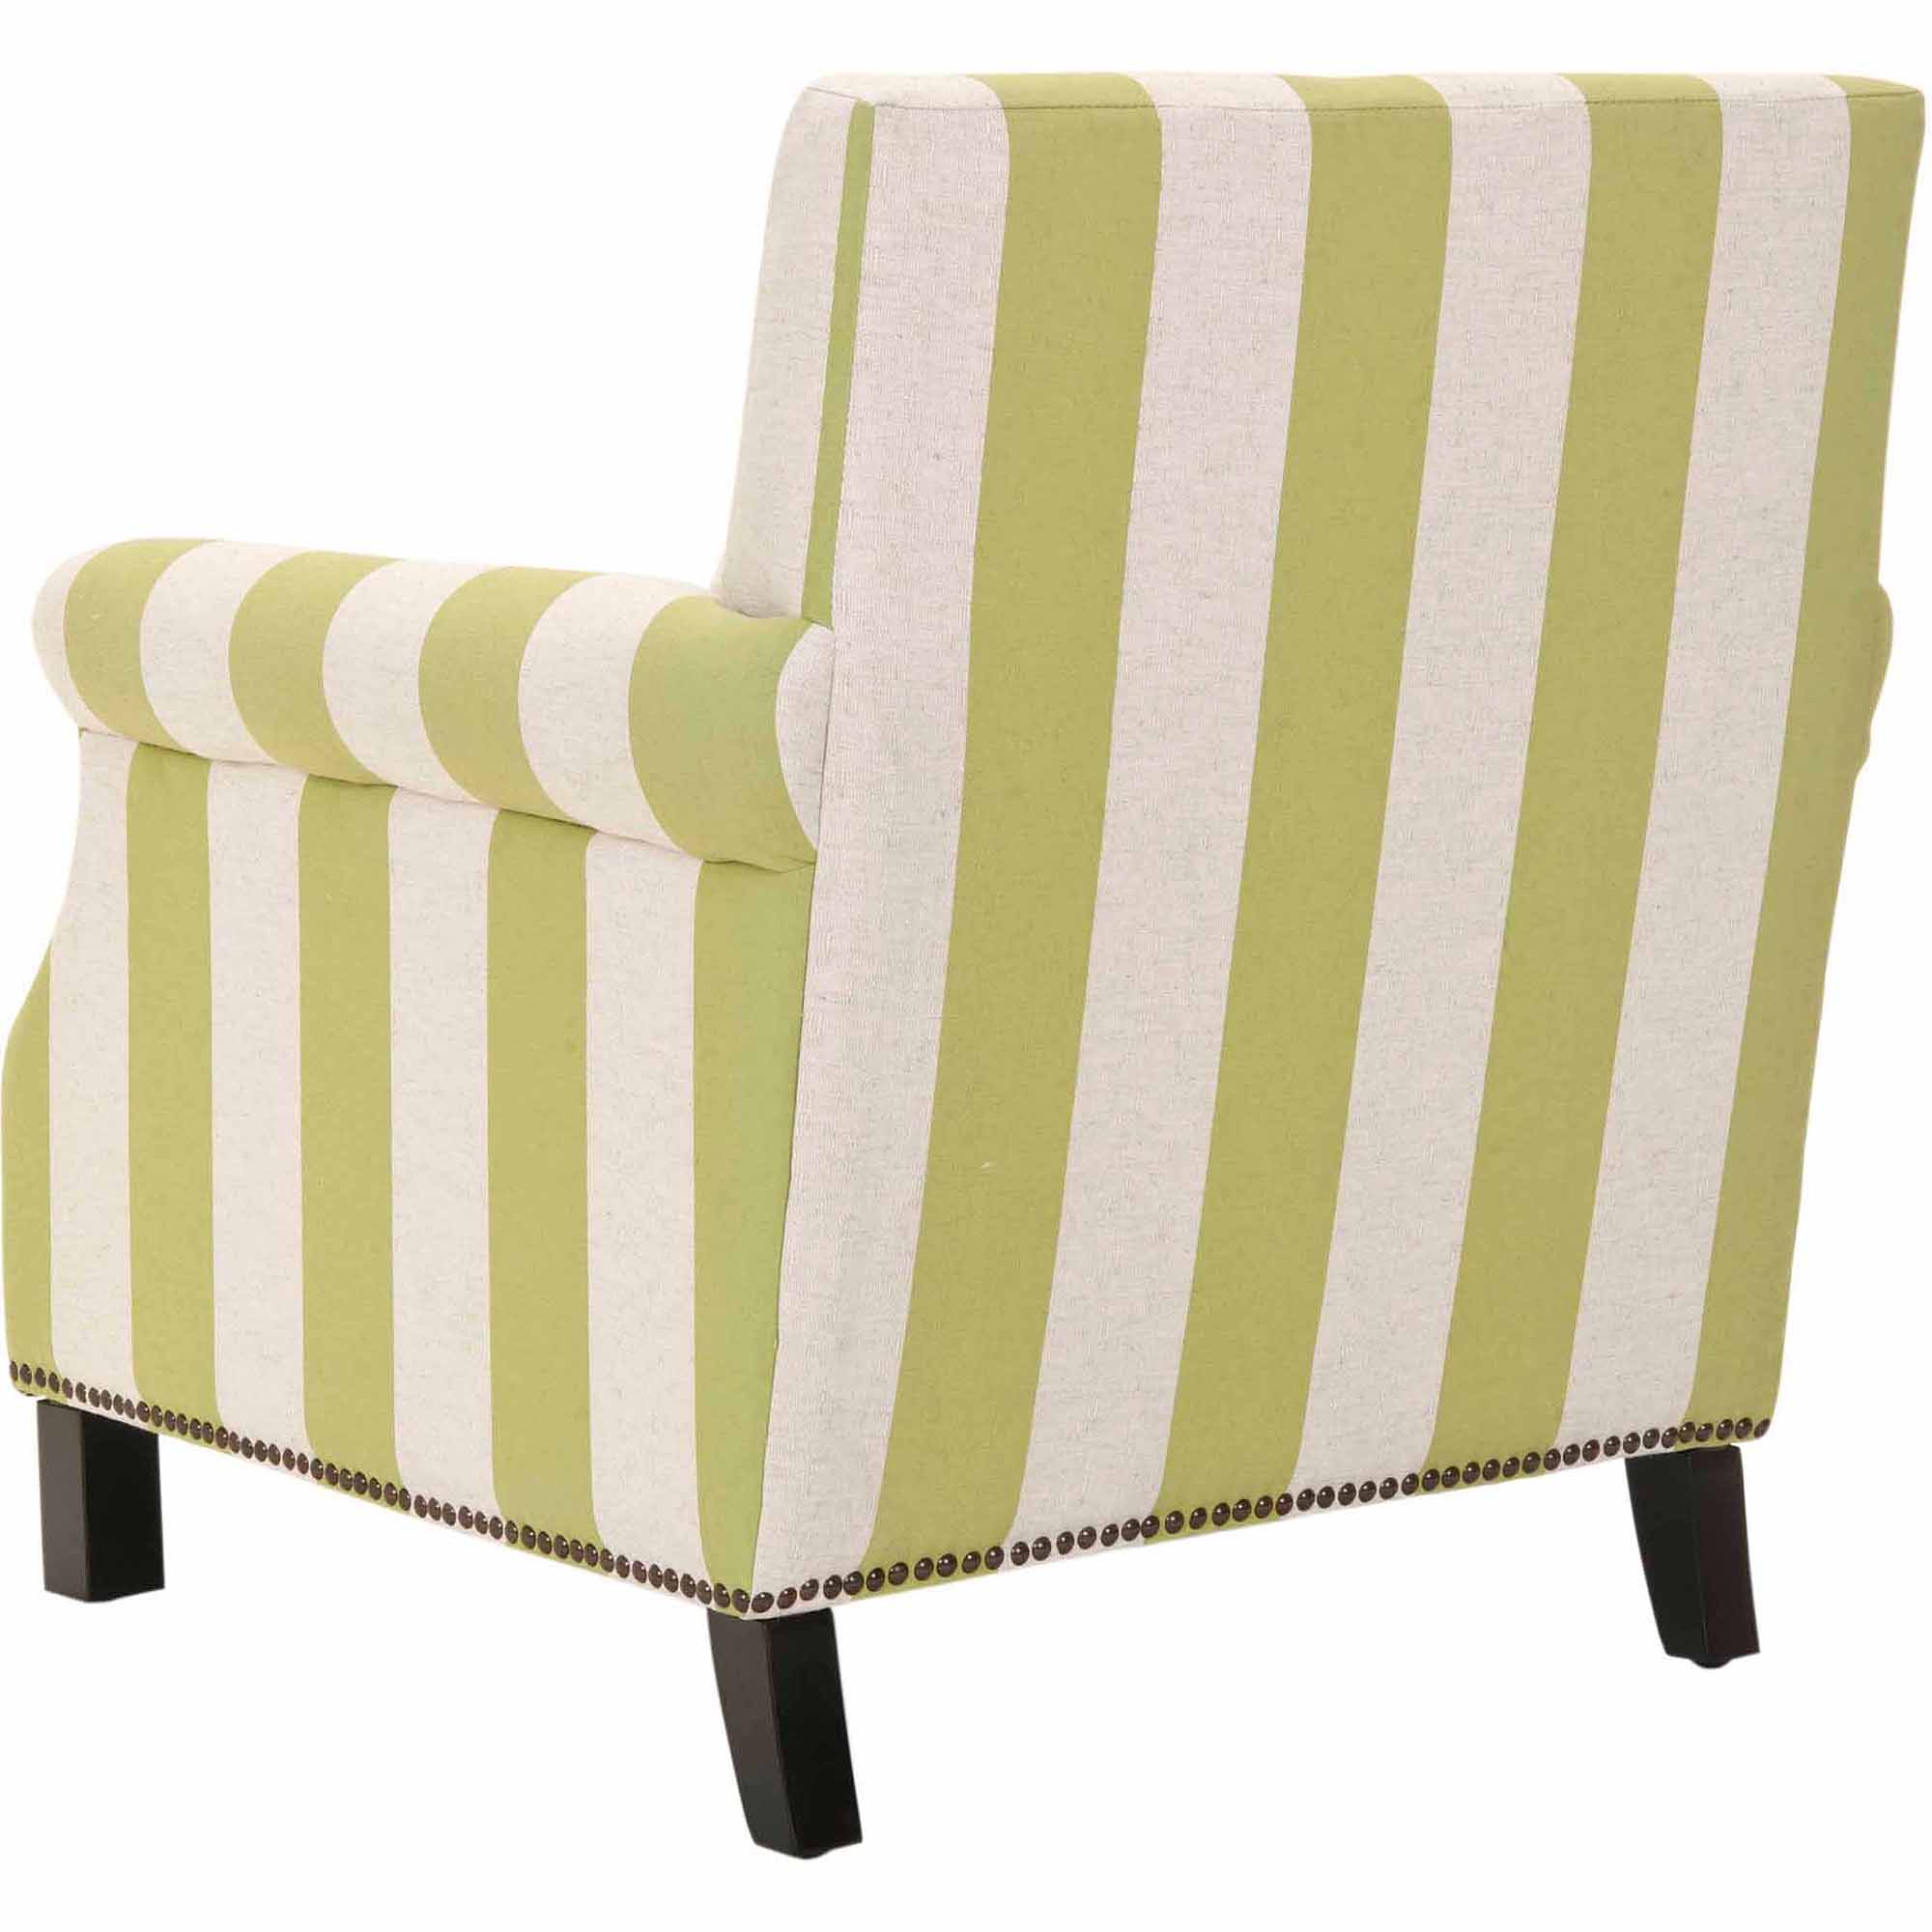 SAFAVIEH Easton Rustic Glam Upholstered Club Chair w/ Nailheads, Lime Green/White - image 4 of 4